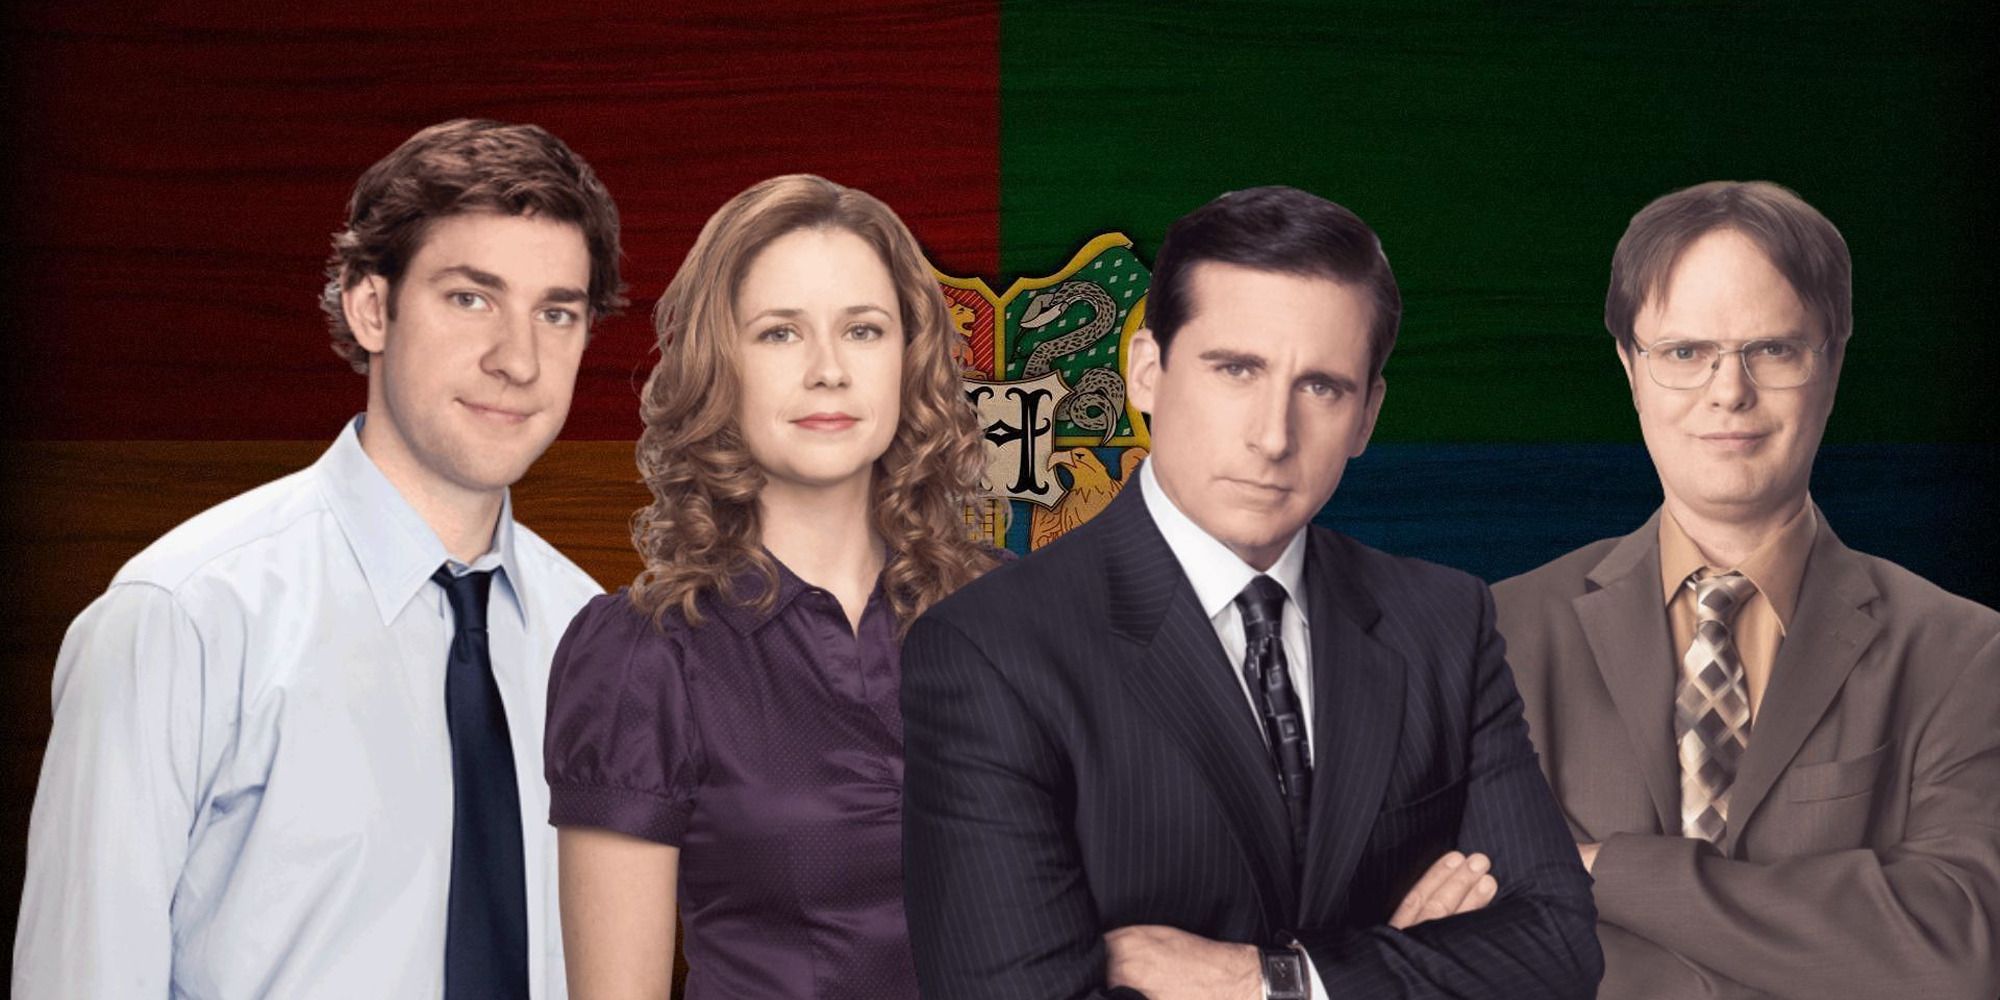 10 'The Office' Characters Sorted Into Their Hogwarts Houses